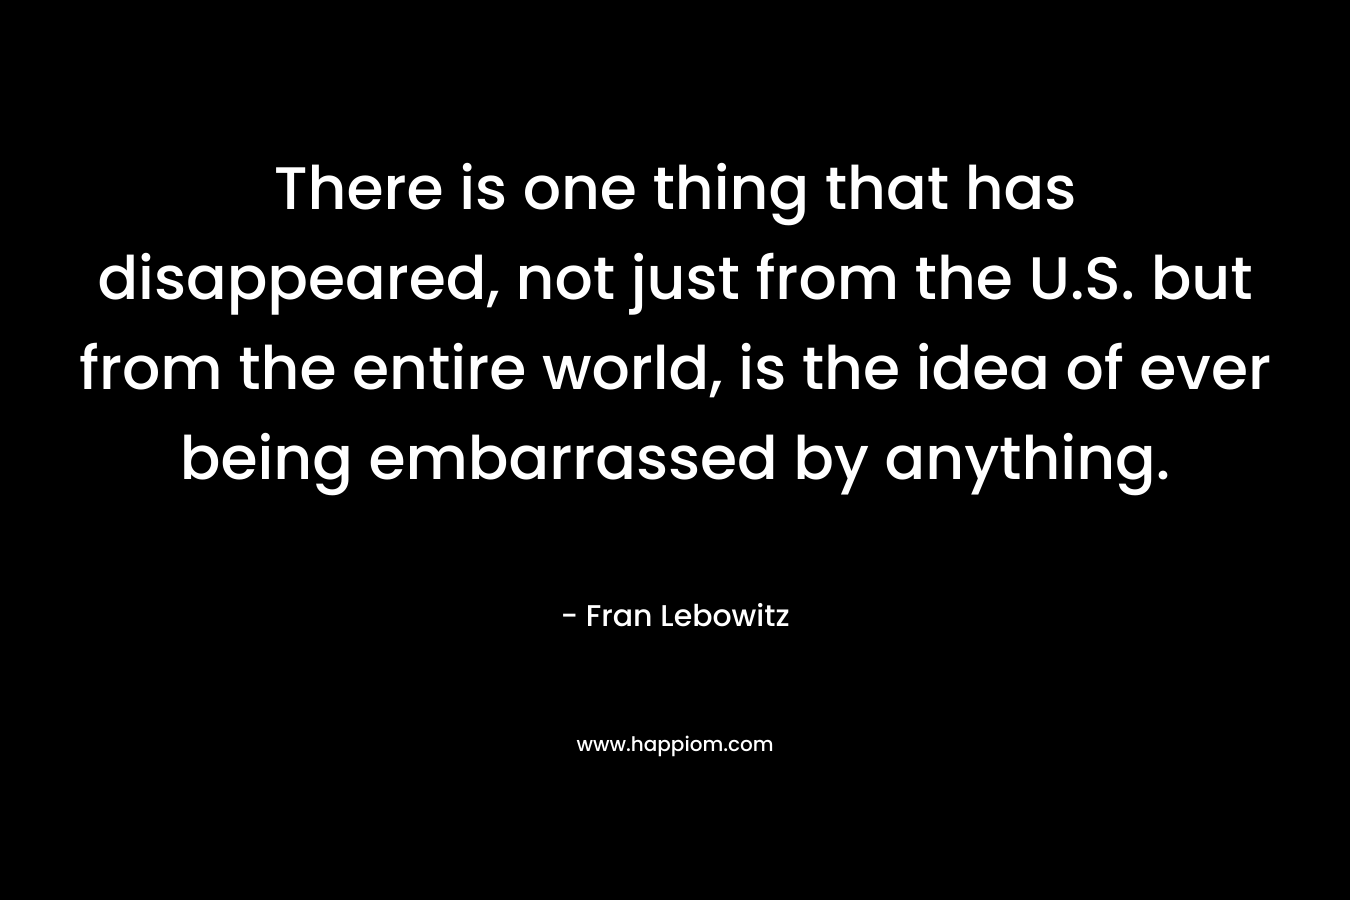 There is one thing that has disappeared, not just from the U.S. but from the entire world, is the idea of ever being embarrassed by anything. – Fran Lebowitz